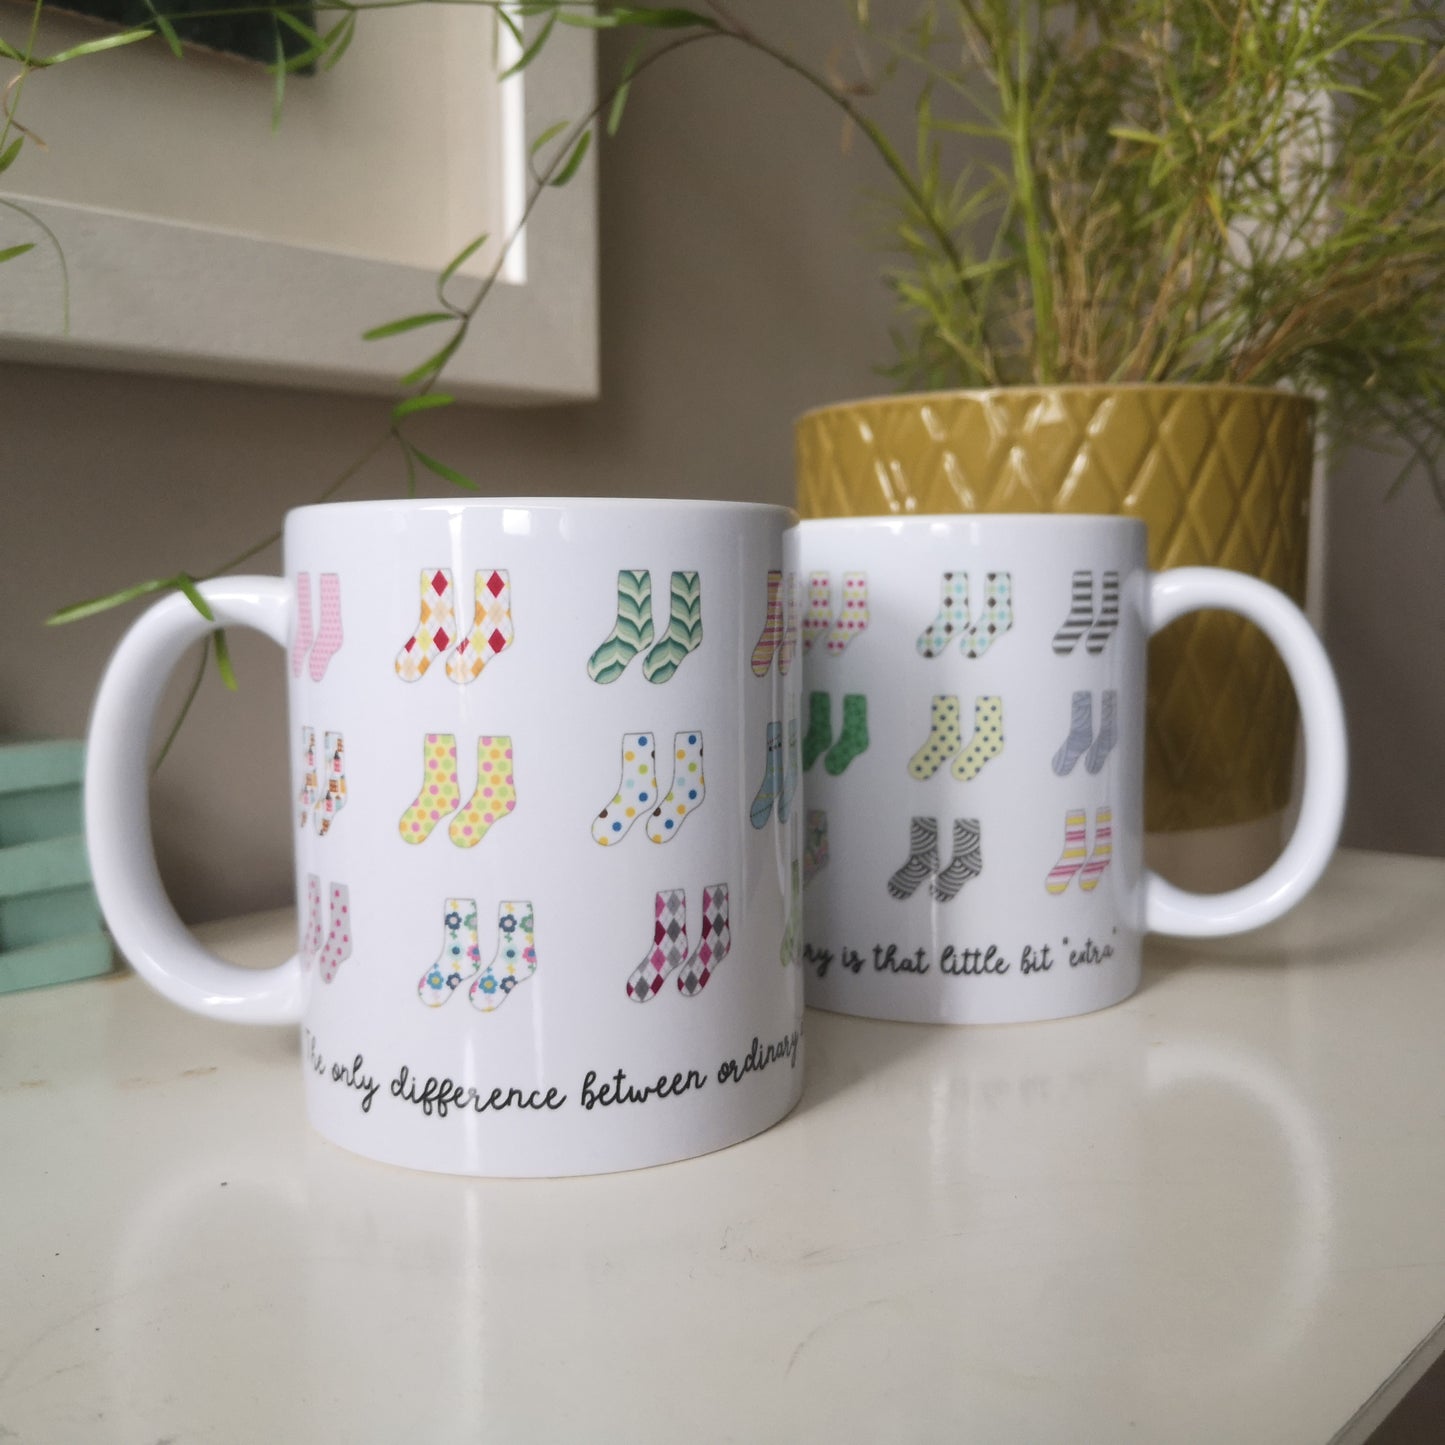 A mug that celebrates Down Syndrome and how it is the result of having 47 chromosomes instead of 46.  Each colourful pair of socks represents the 44 chromosomes we all have, but pair 21 has 3 socks instead of 2.